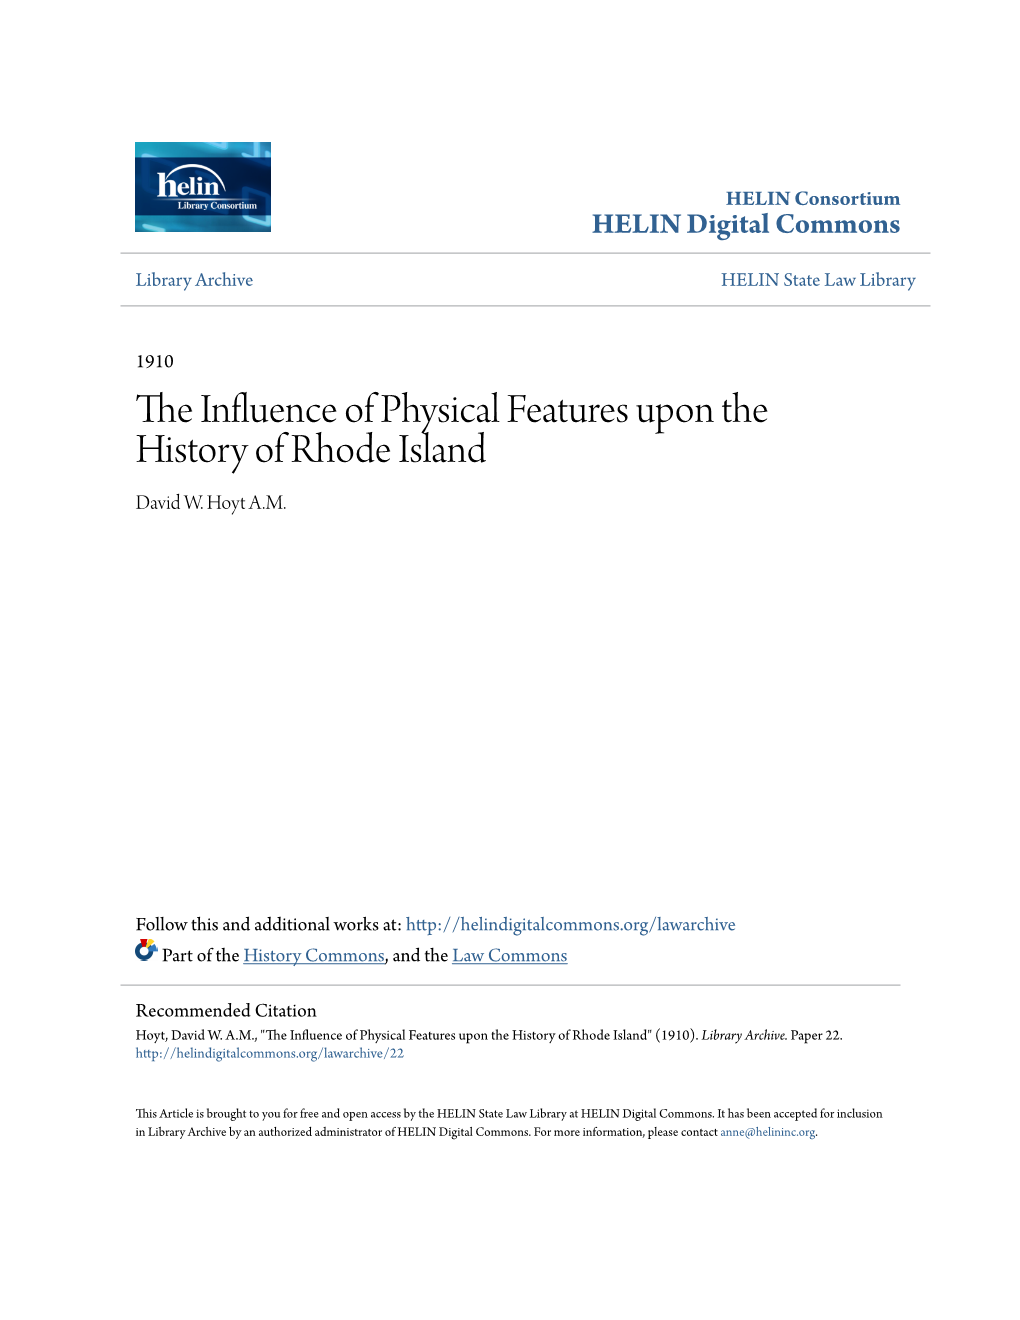 The Influence of Physical Features Upon the History of Rhode Island